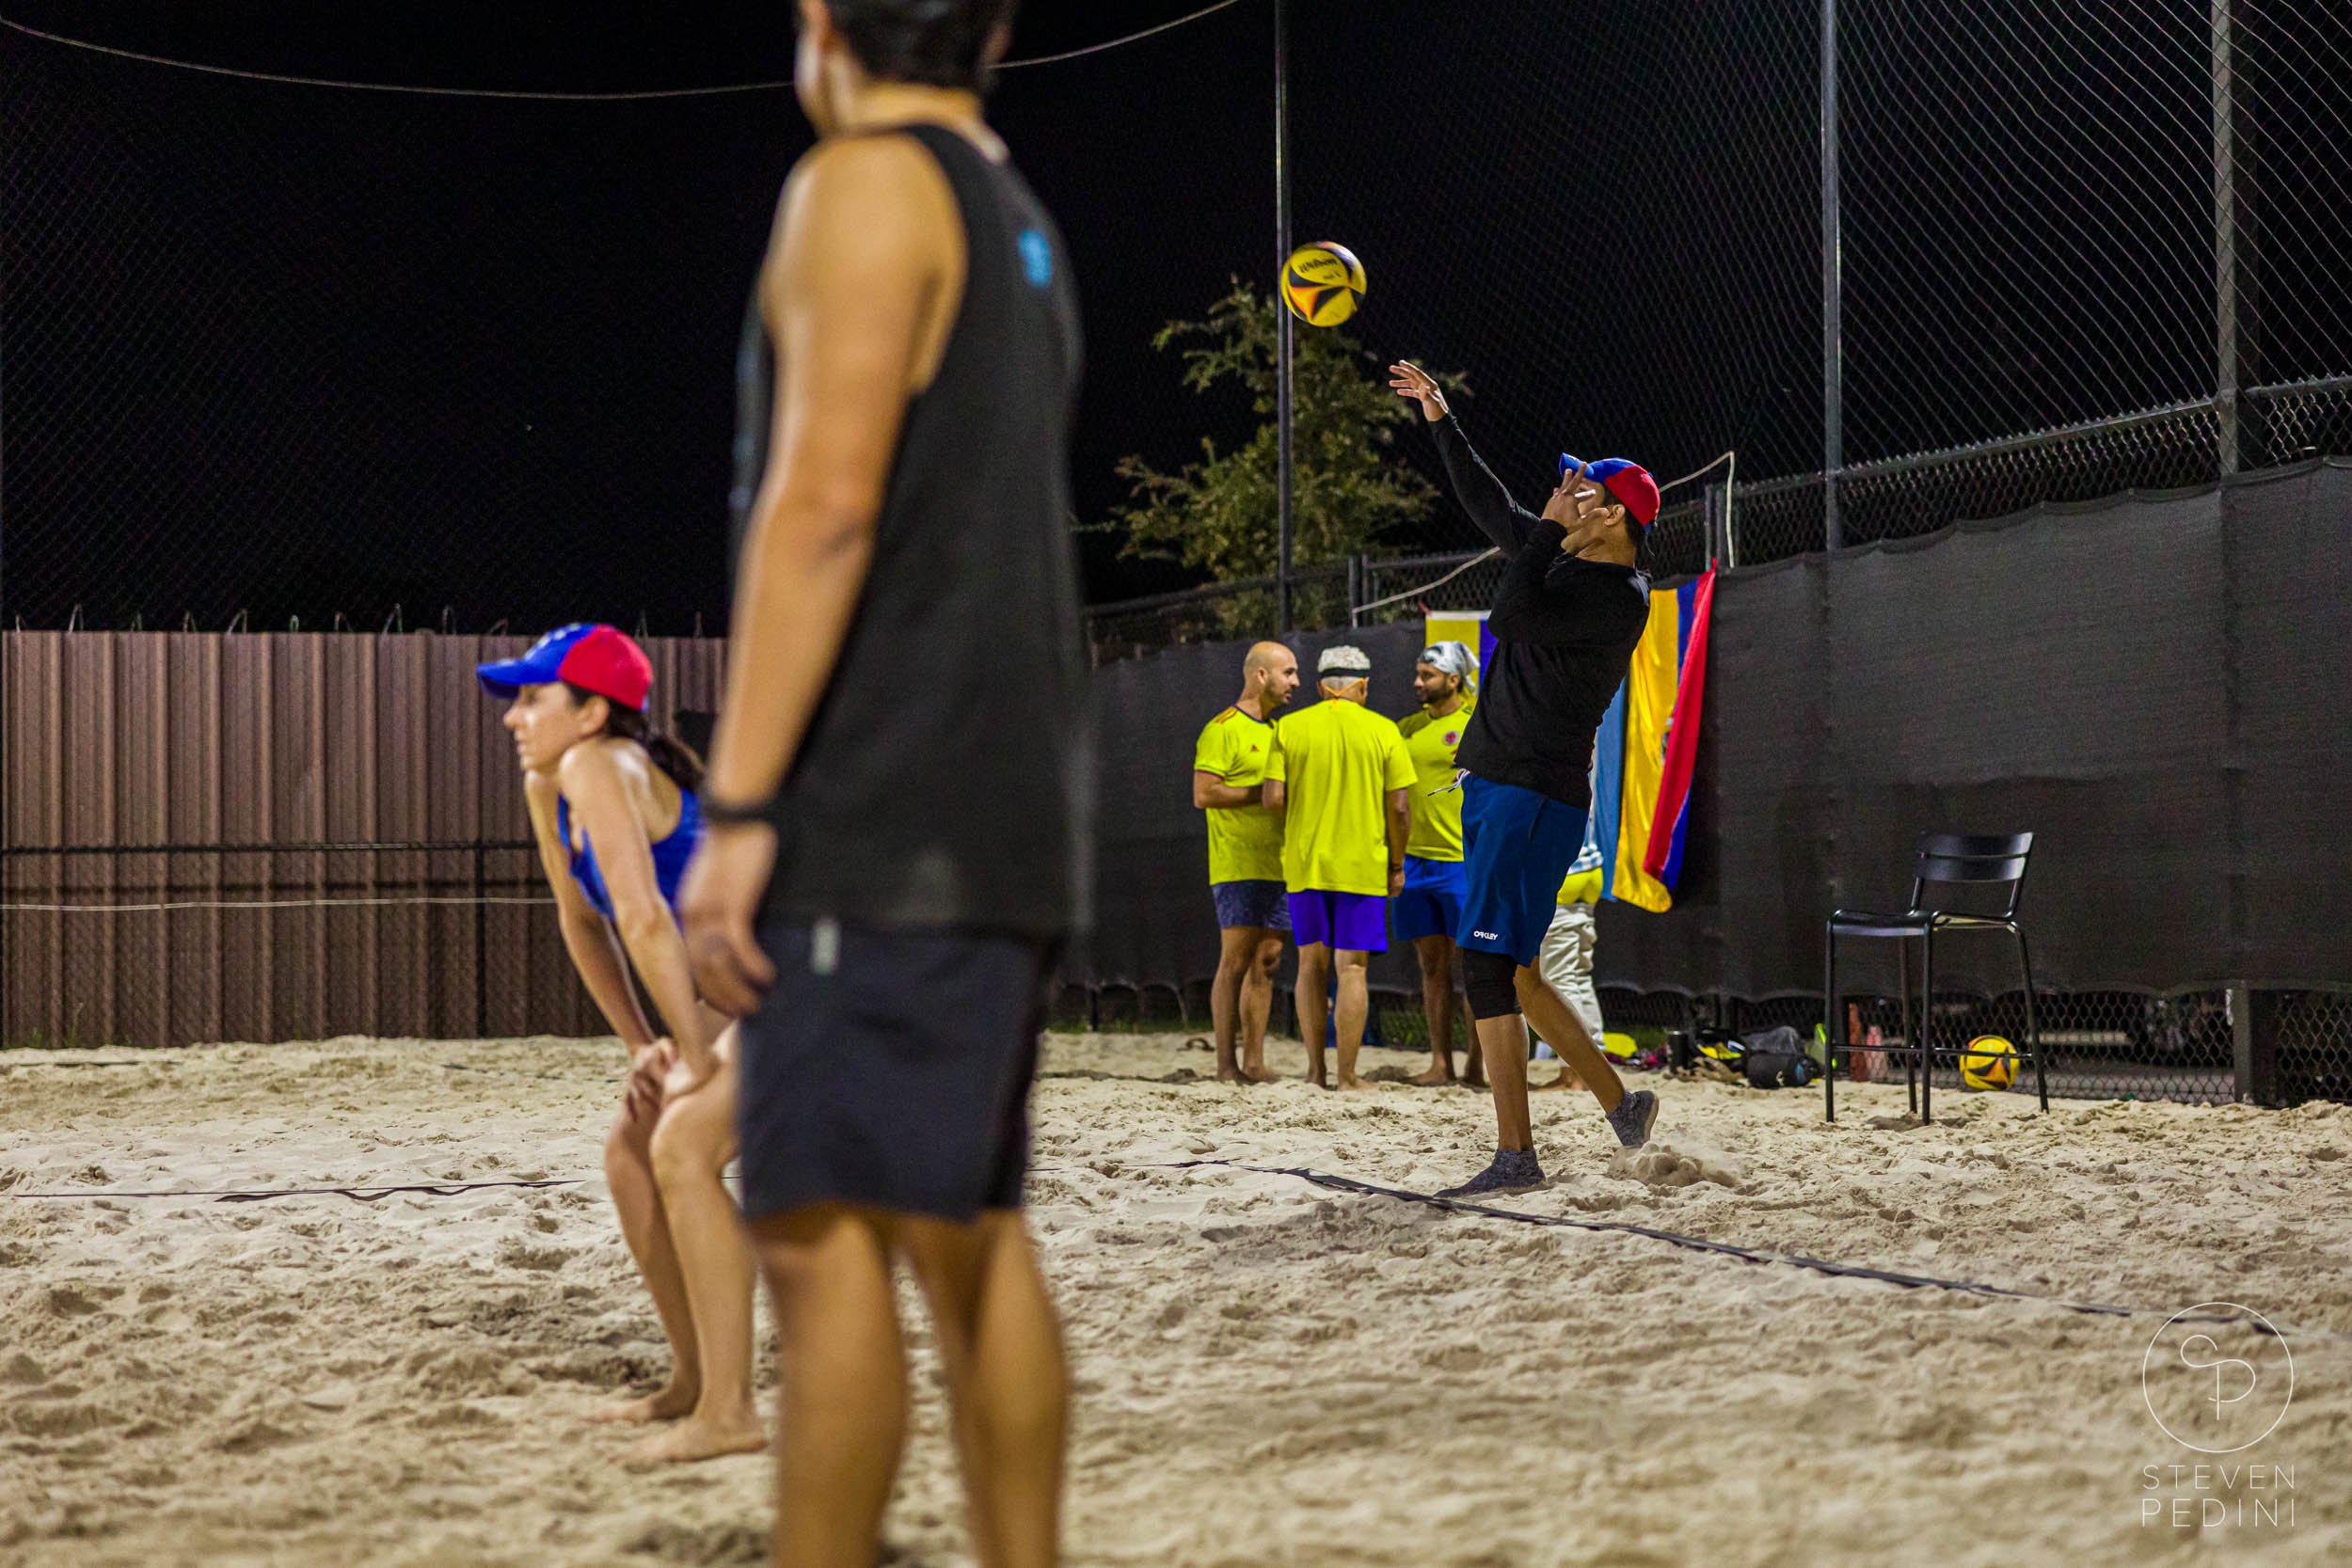 Steven Pedini Photography - Bumpy Pickle - Sand Volleyball - Houston TX - World Cup of Volleyball - 00395.jpg